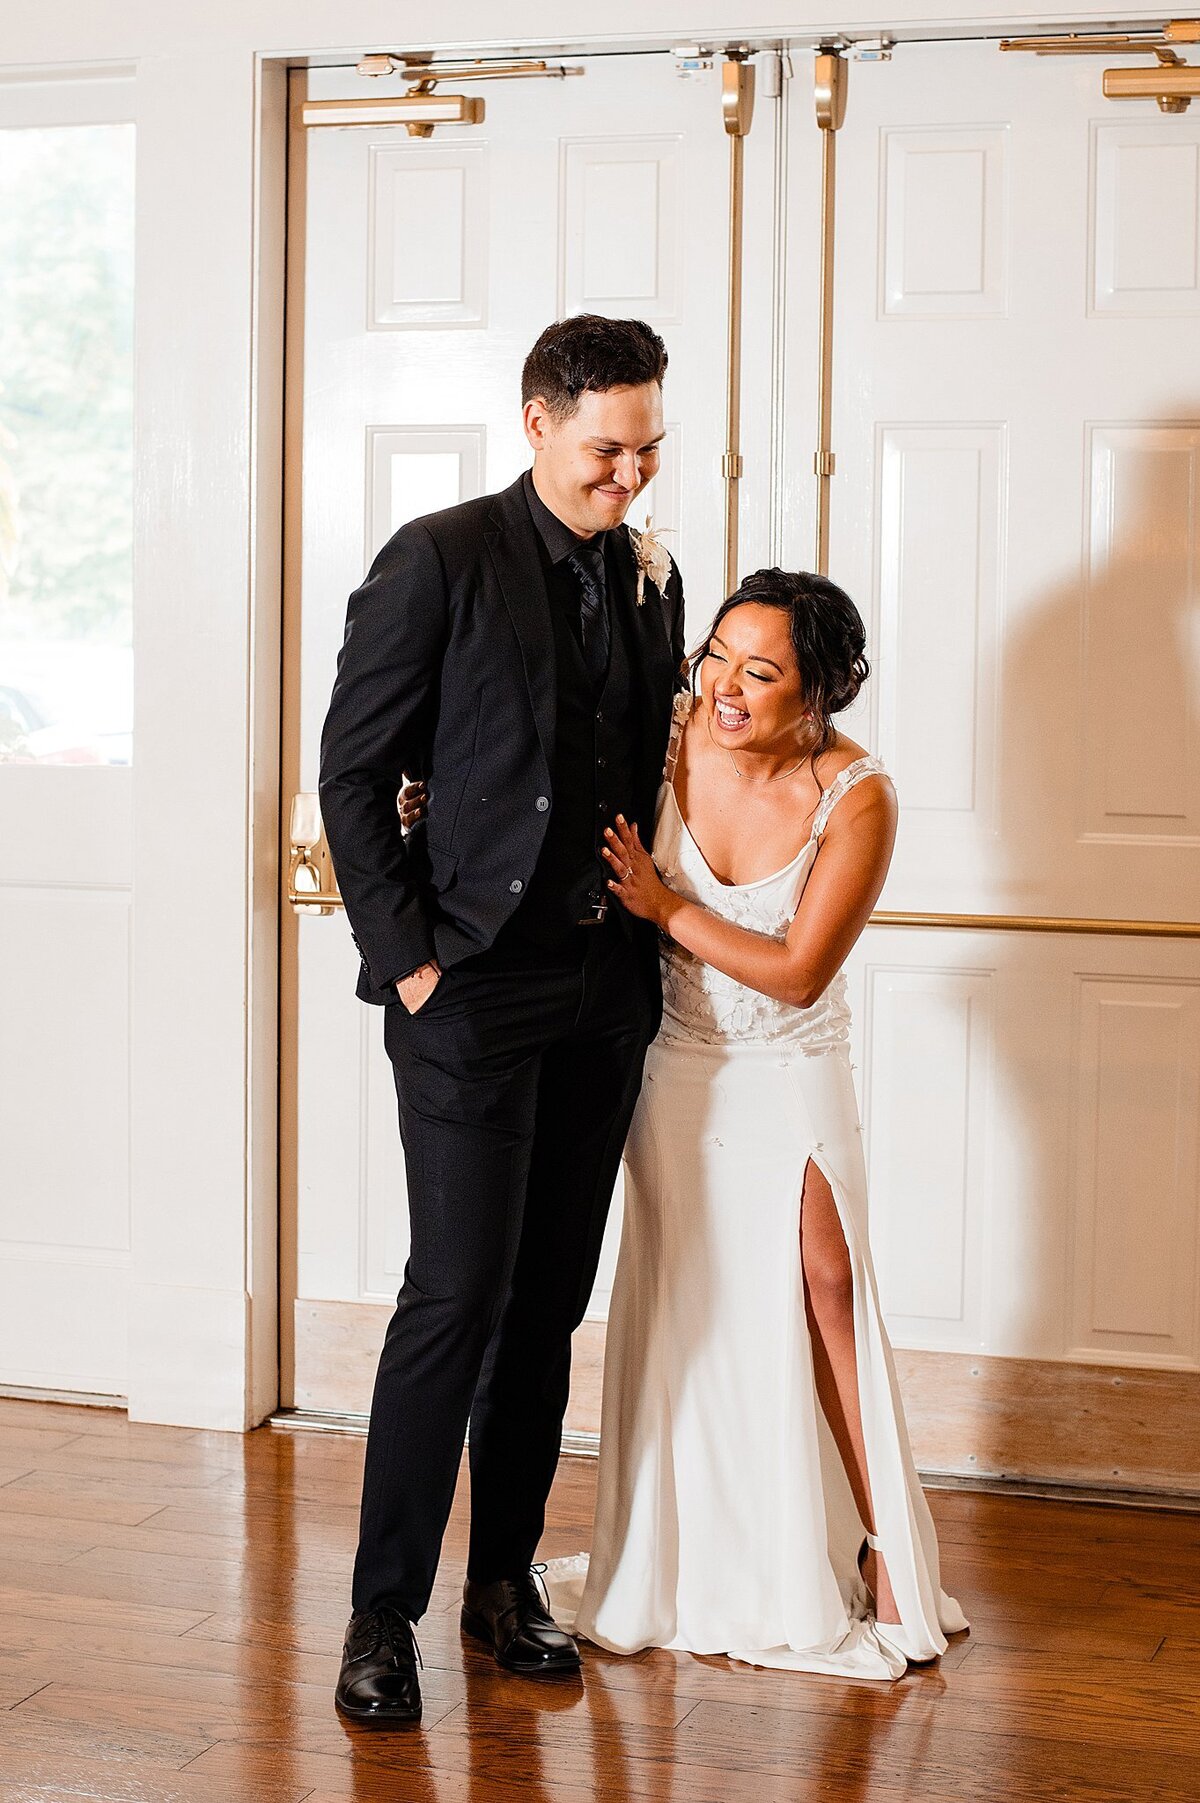 The bride holds onto the grooms arm as they enter their reception laughing together. The bride is wearing a fitted wedding gown with spaghetti straps and a thigh high slit in the skirt. The groom is wearing a black suit with a black shirt and a white rose boutonniere.